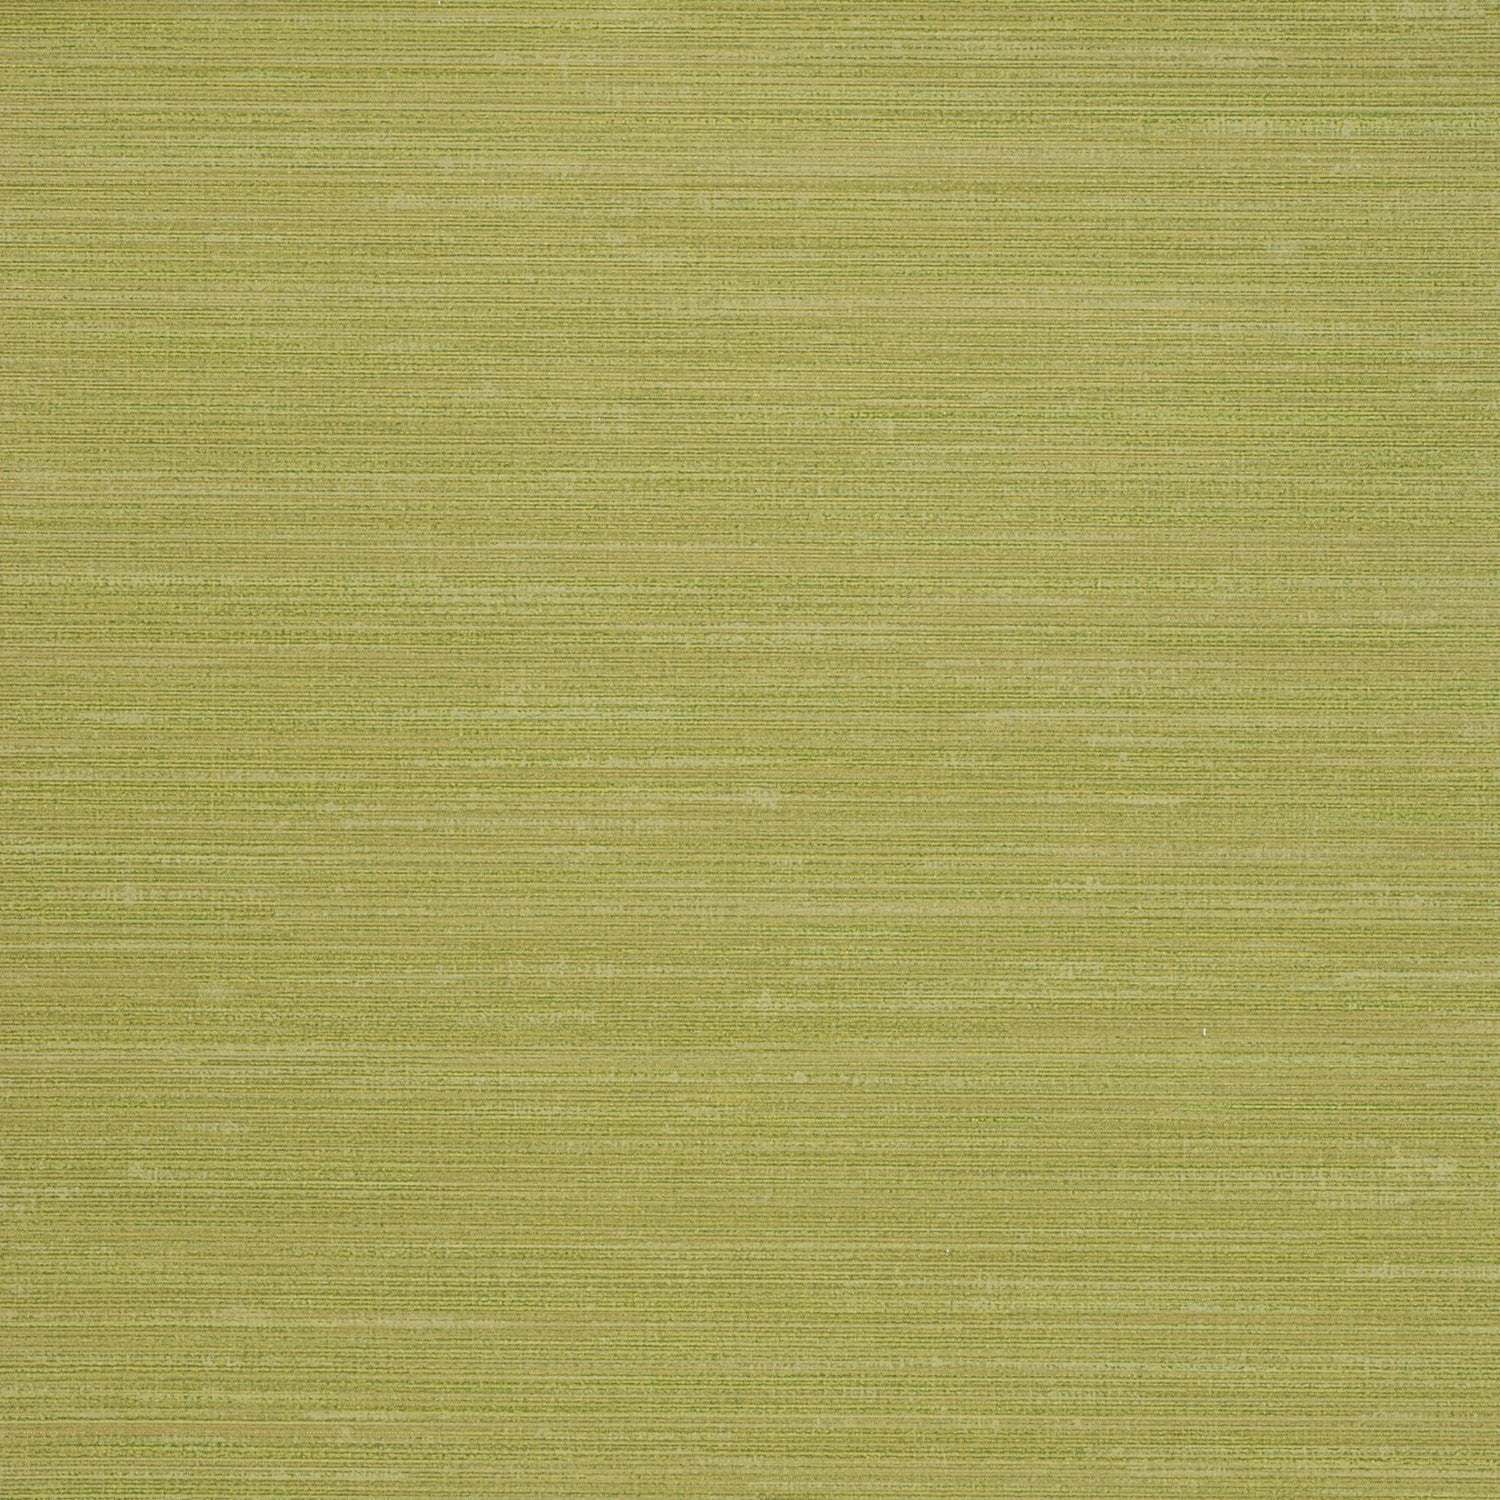 Casbah Silk - Y46476 - Wallcovering - Vycon - Kube Contract